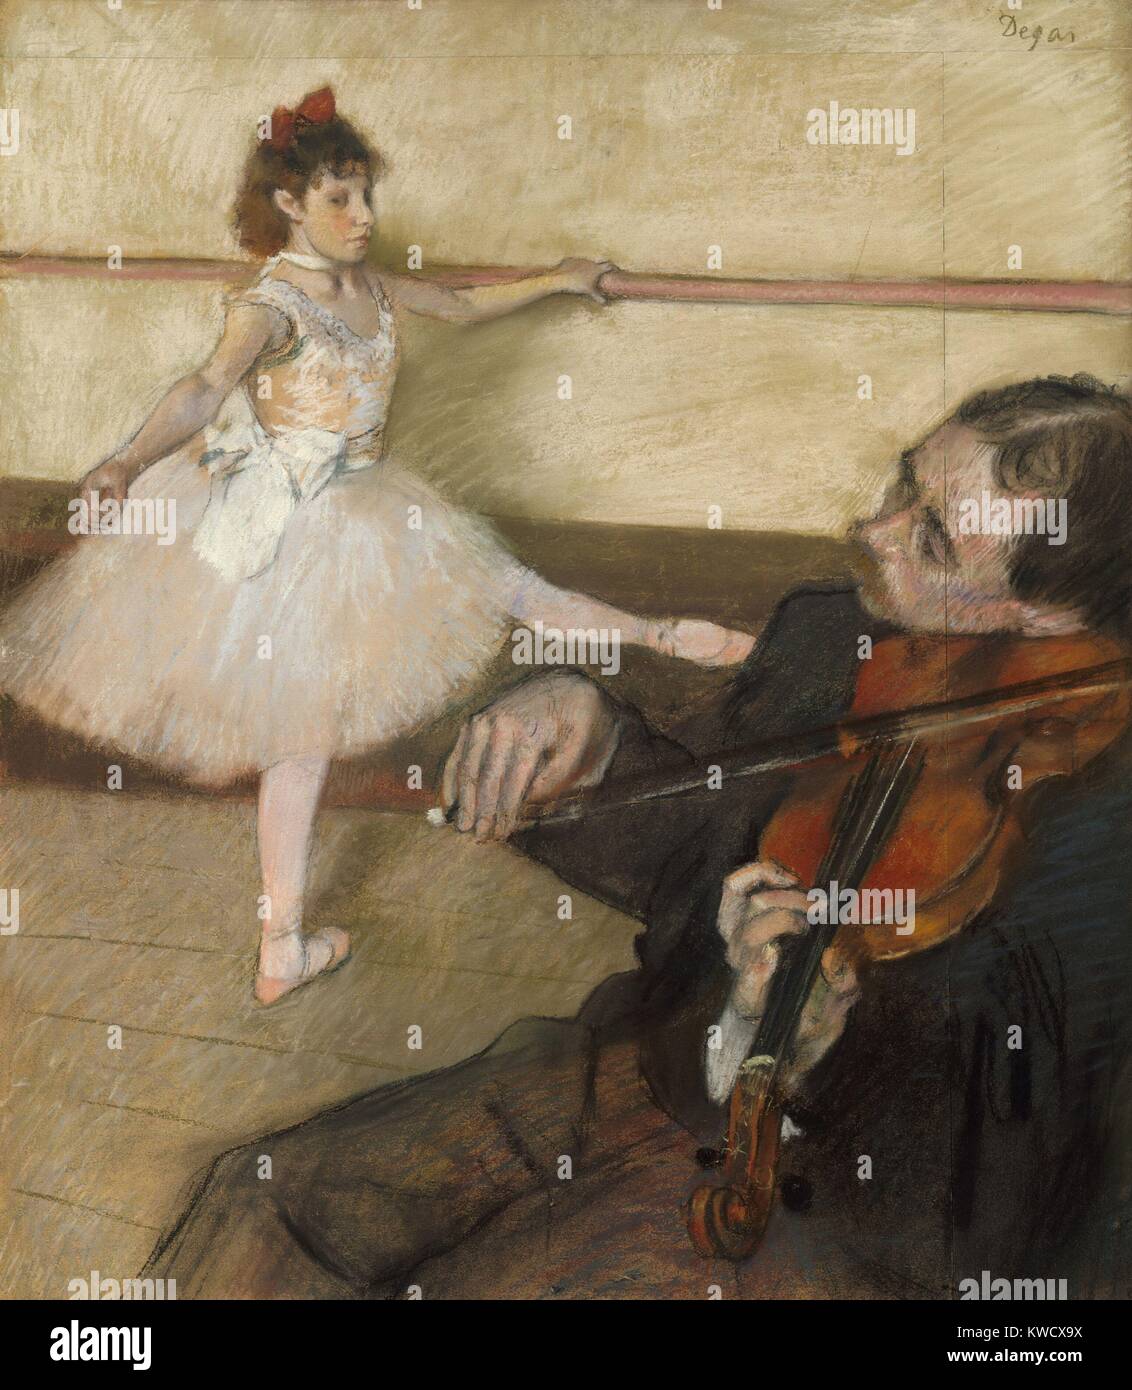 The Dance Lesson, by Edgar Degas, 1879, French impressionist drawing, pastel on paper. Degas added a panel of paper at top and on right to incorporate the violin player (BSLOC 2017 3 108) Stock Photo